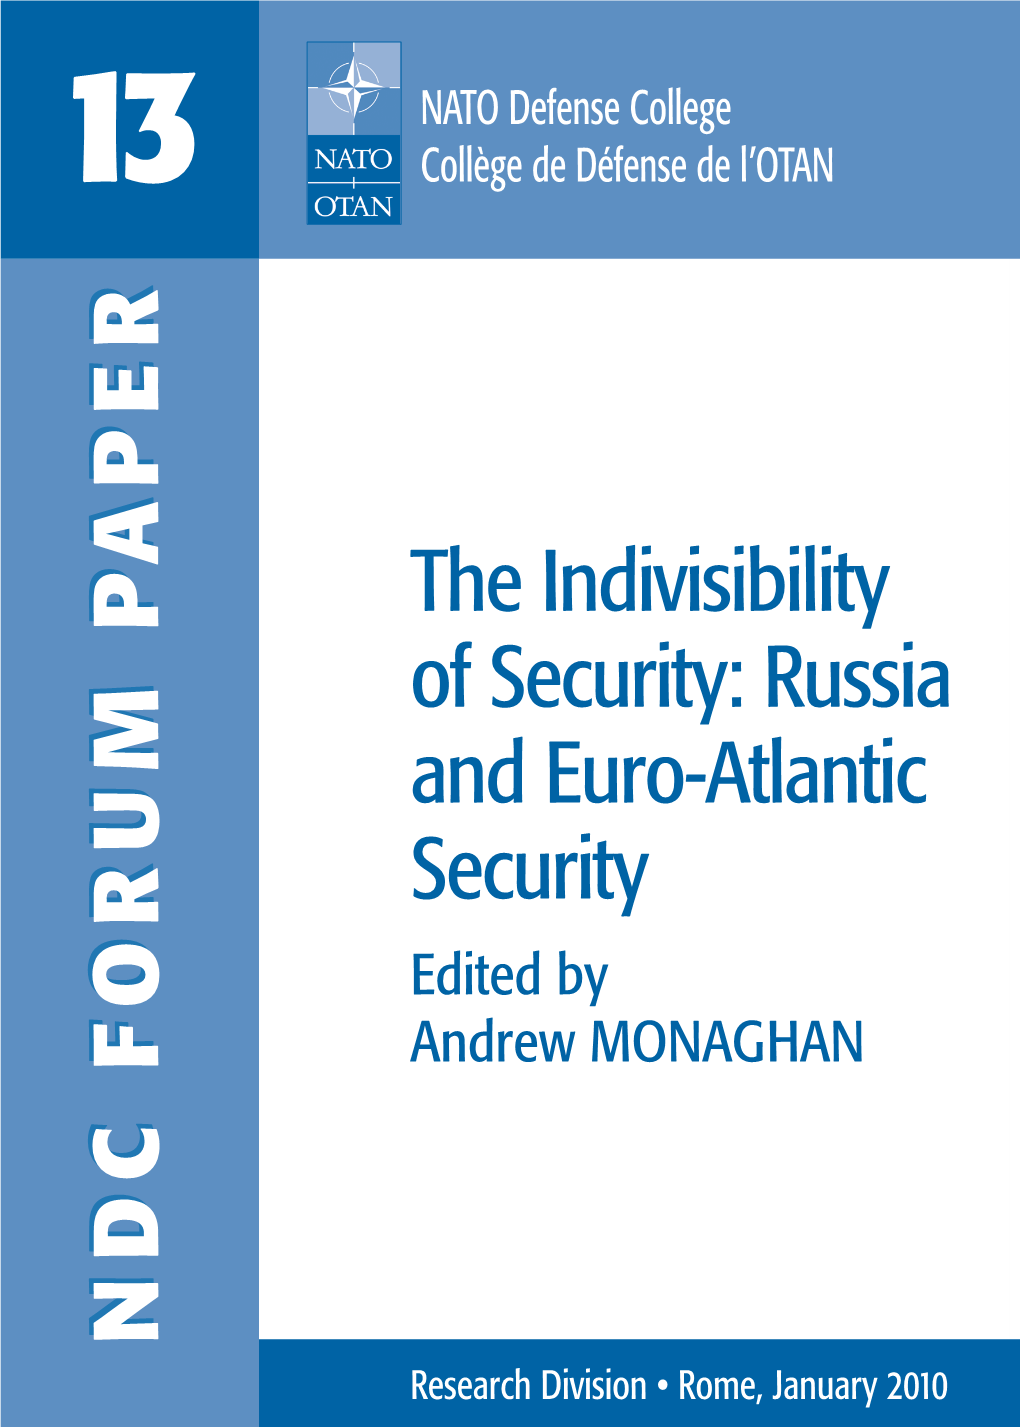 The Indivisibility of Security: Russia and Euro-Atlantic Security Edited by Andrew MONAGHAN NDC FORUM PAPER FORUM PAPER NDC NDC FORUM PAPER FORUM PAPER NDC